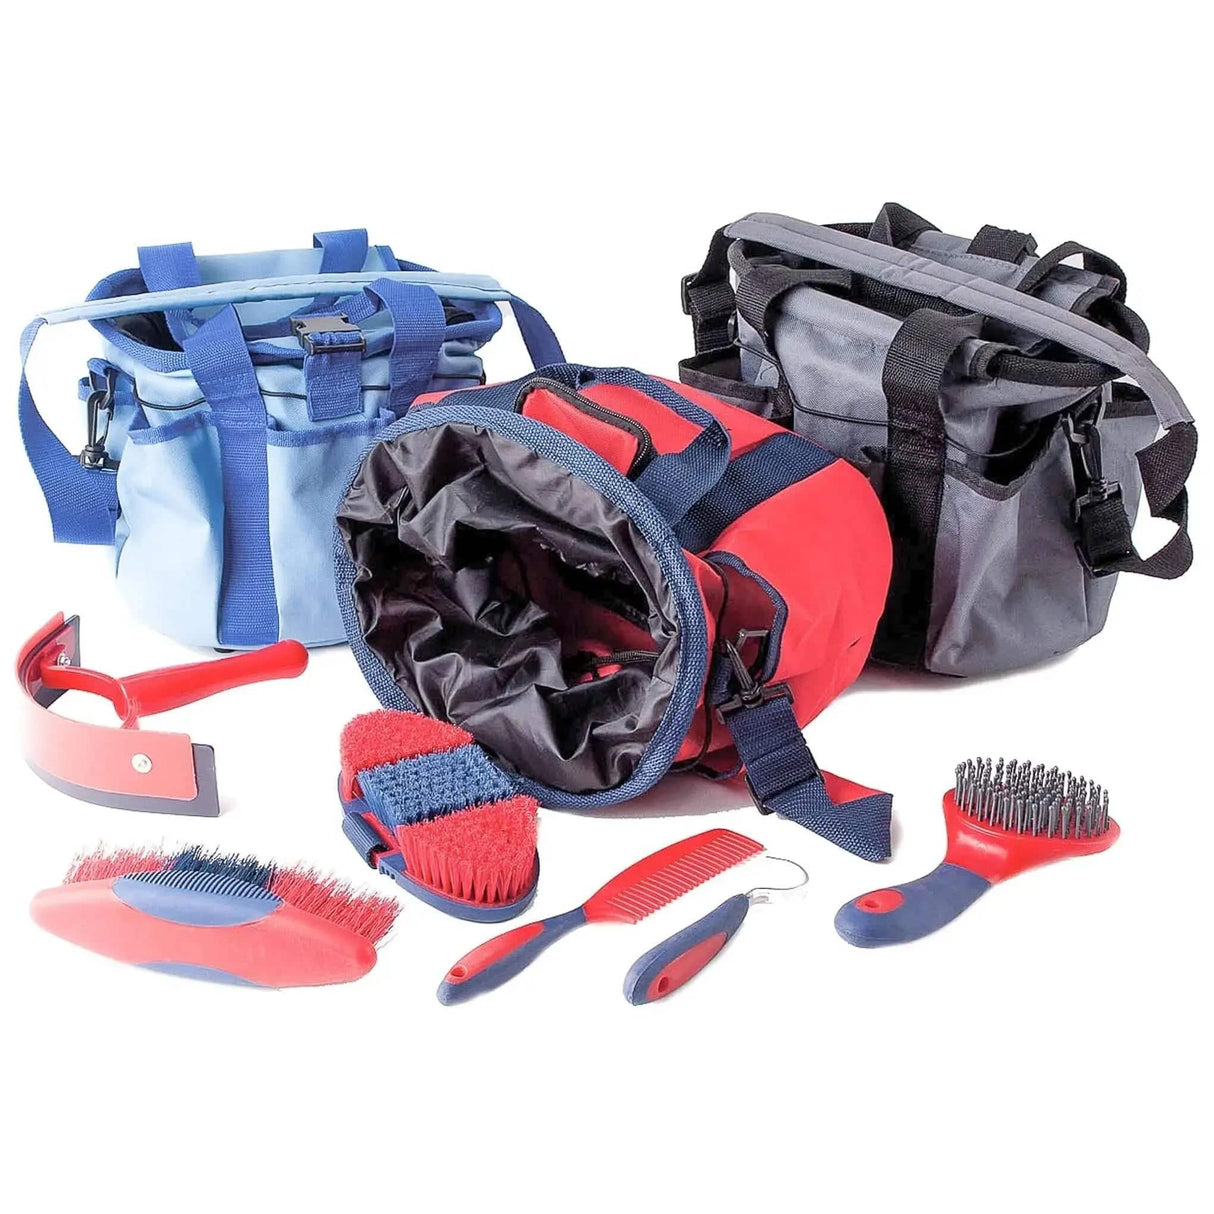 Rhinegold Complete Soft Touch Grooming Kit With Bag Blue Rhinegold Grooming Bags, Boxes & Kits Barnstaple Equestrian Supplies